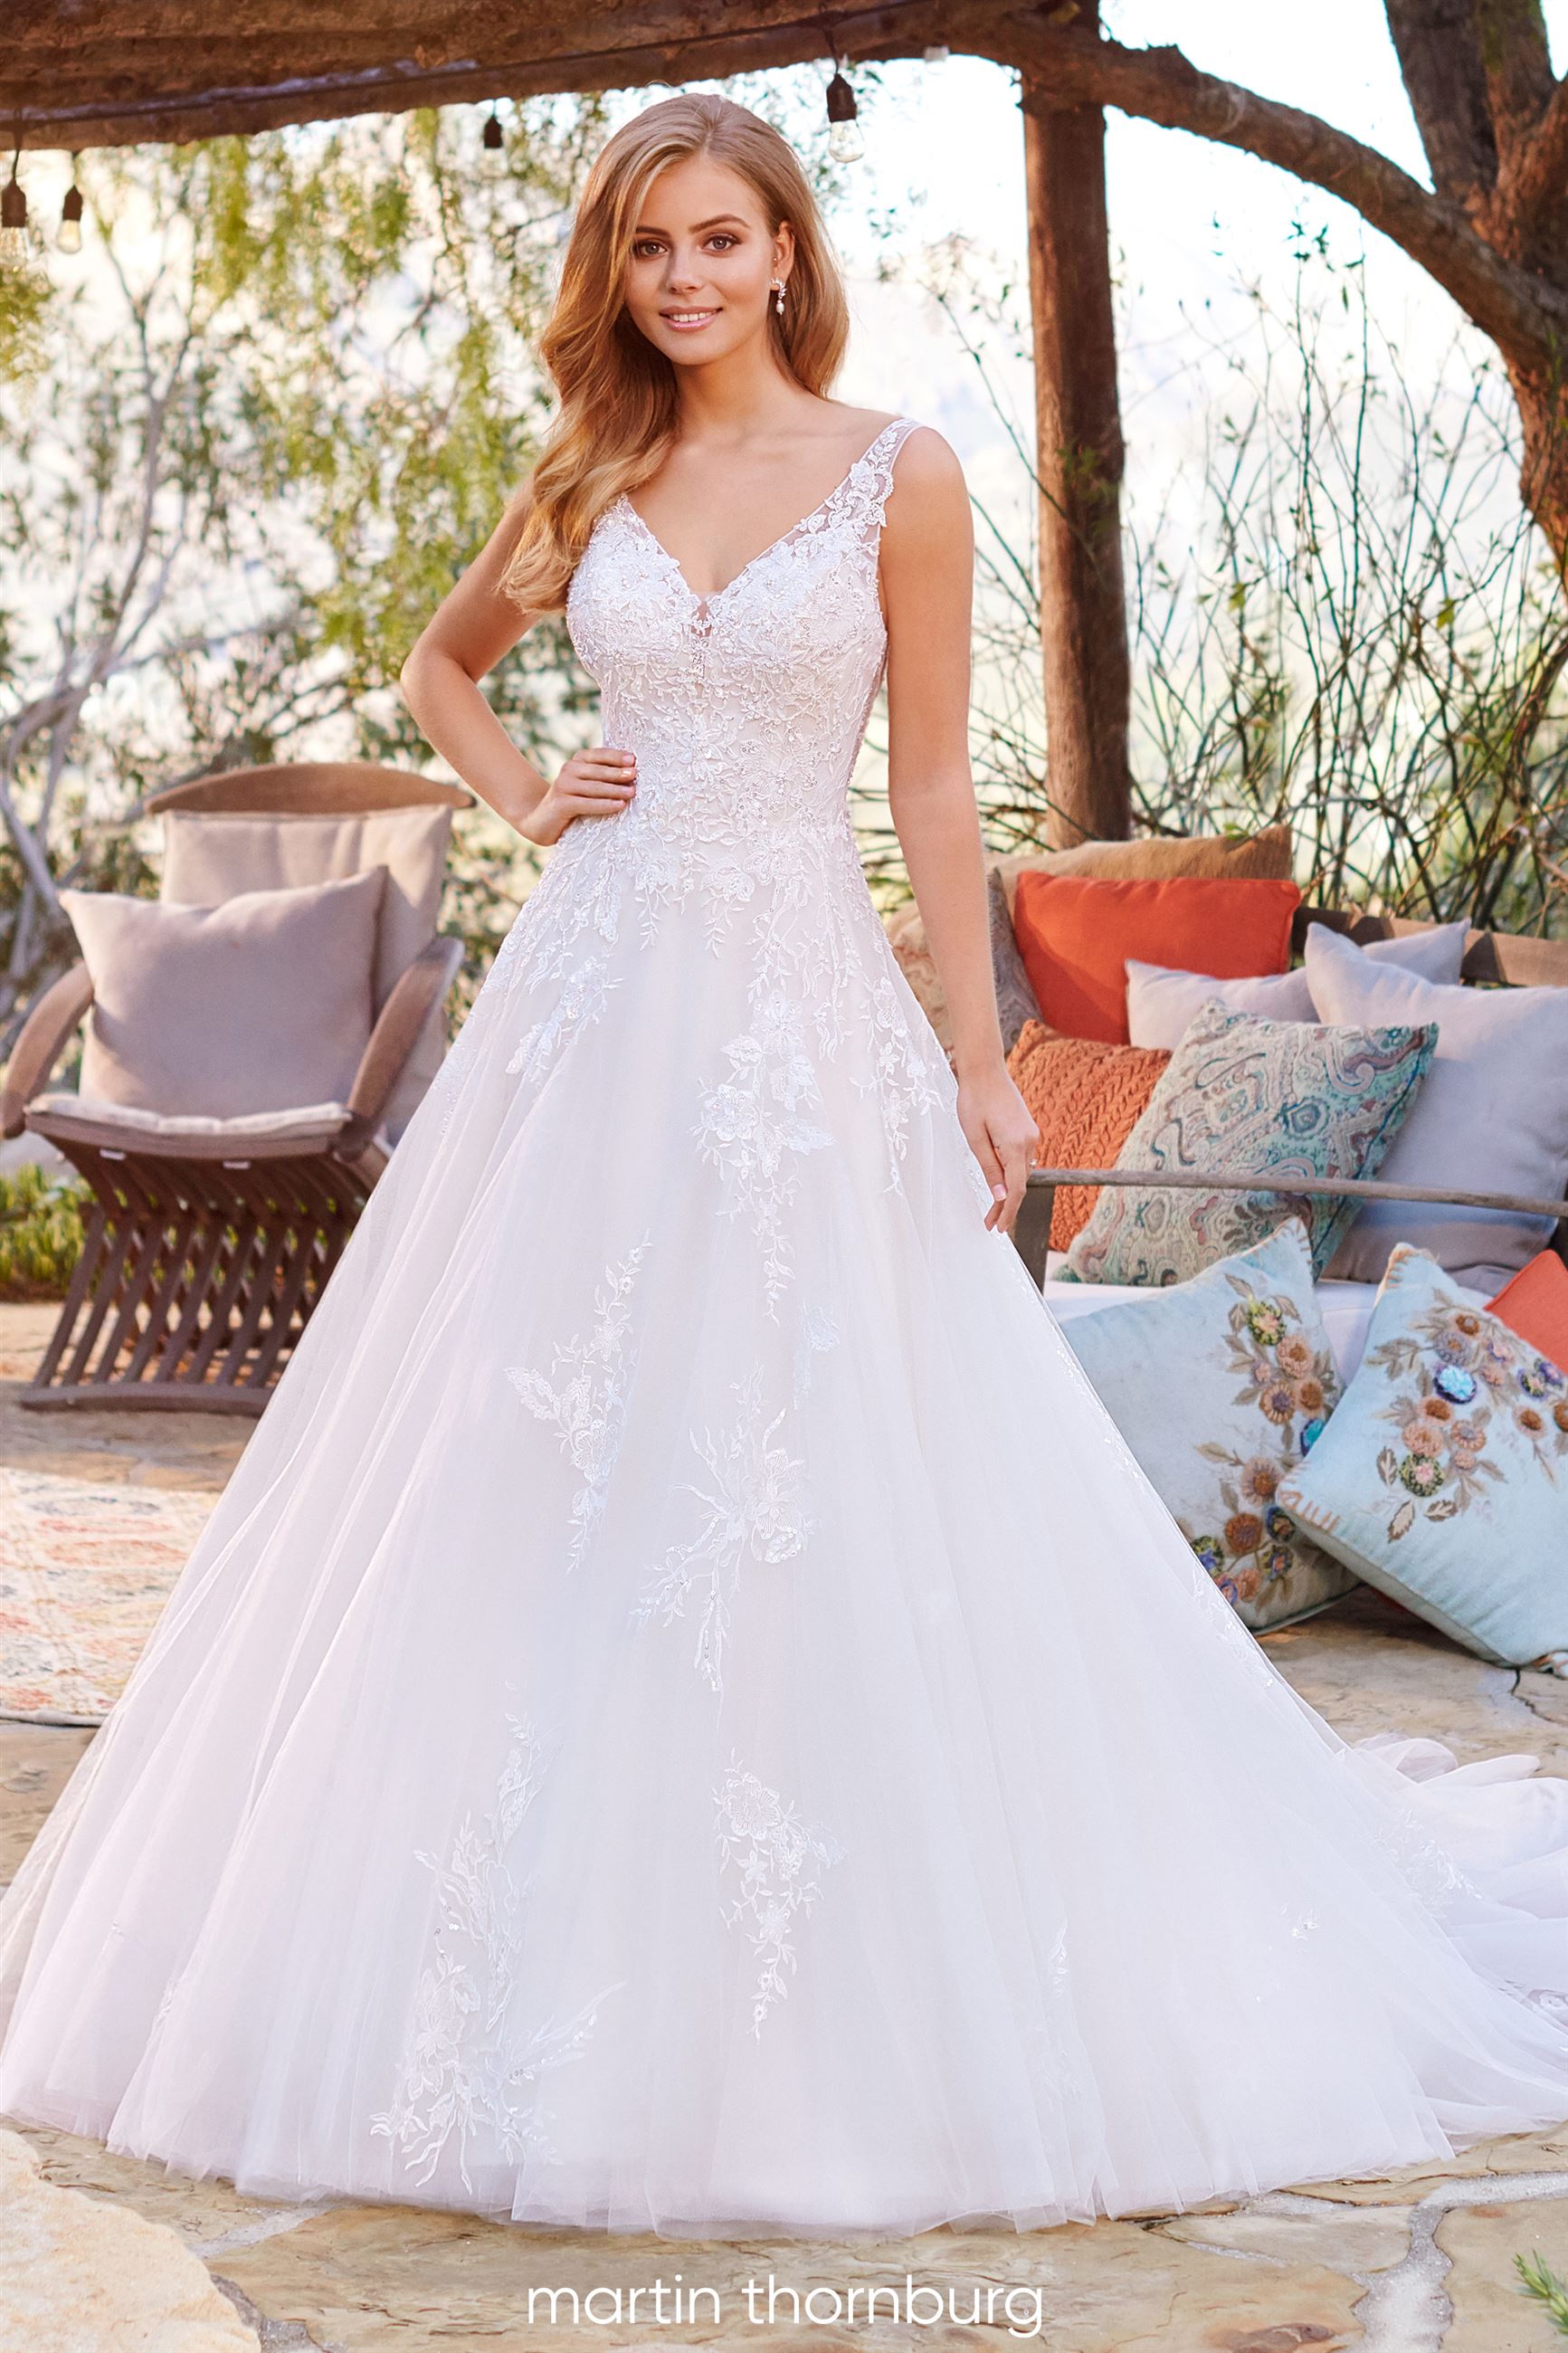 The Ultimate Guide to Wedding Dress Shopping for Petite Brides